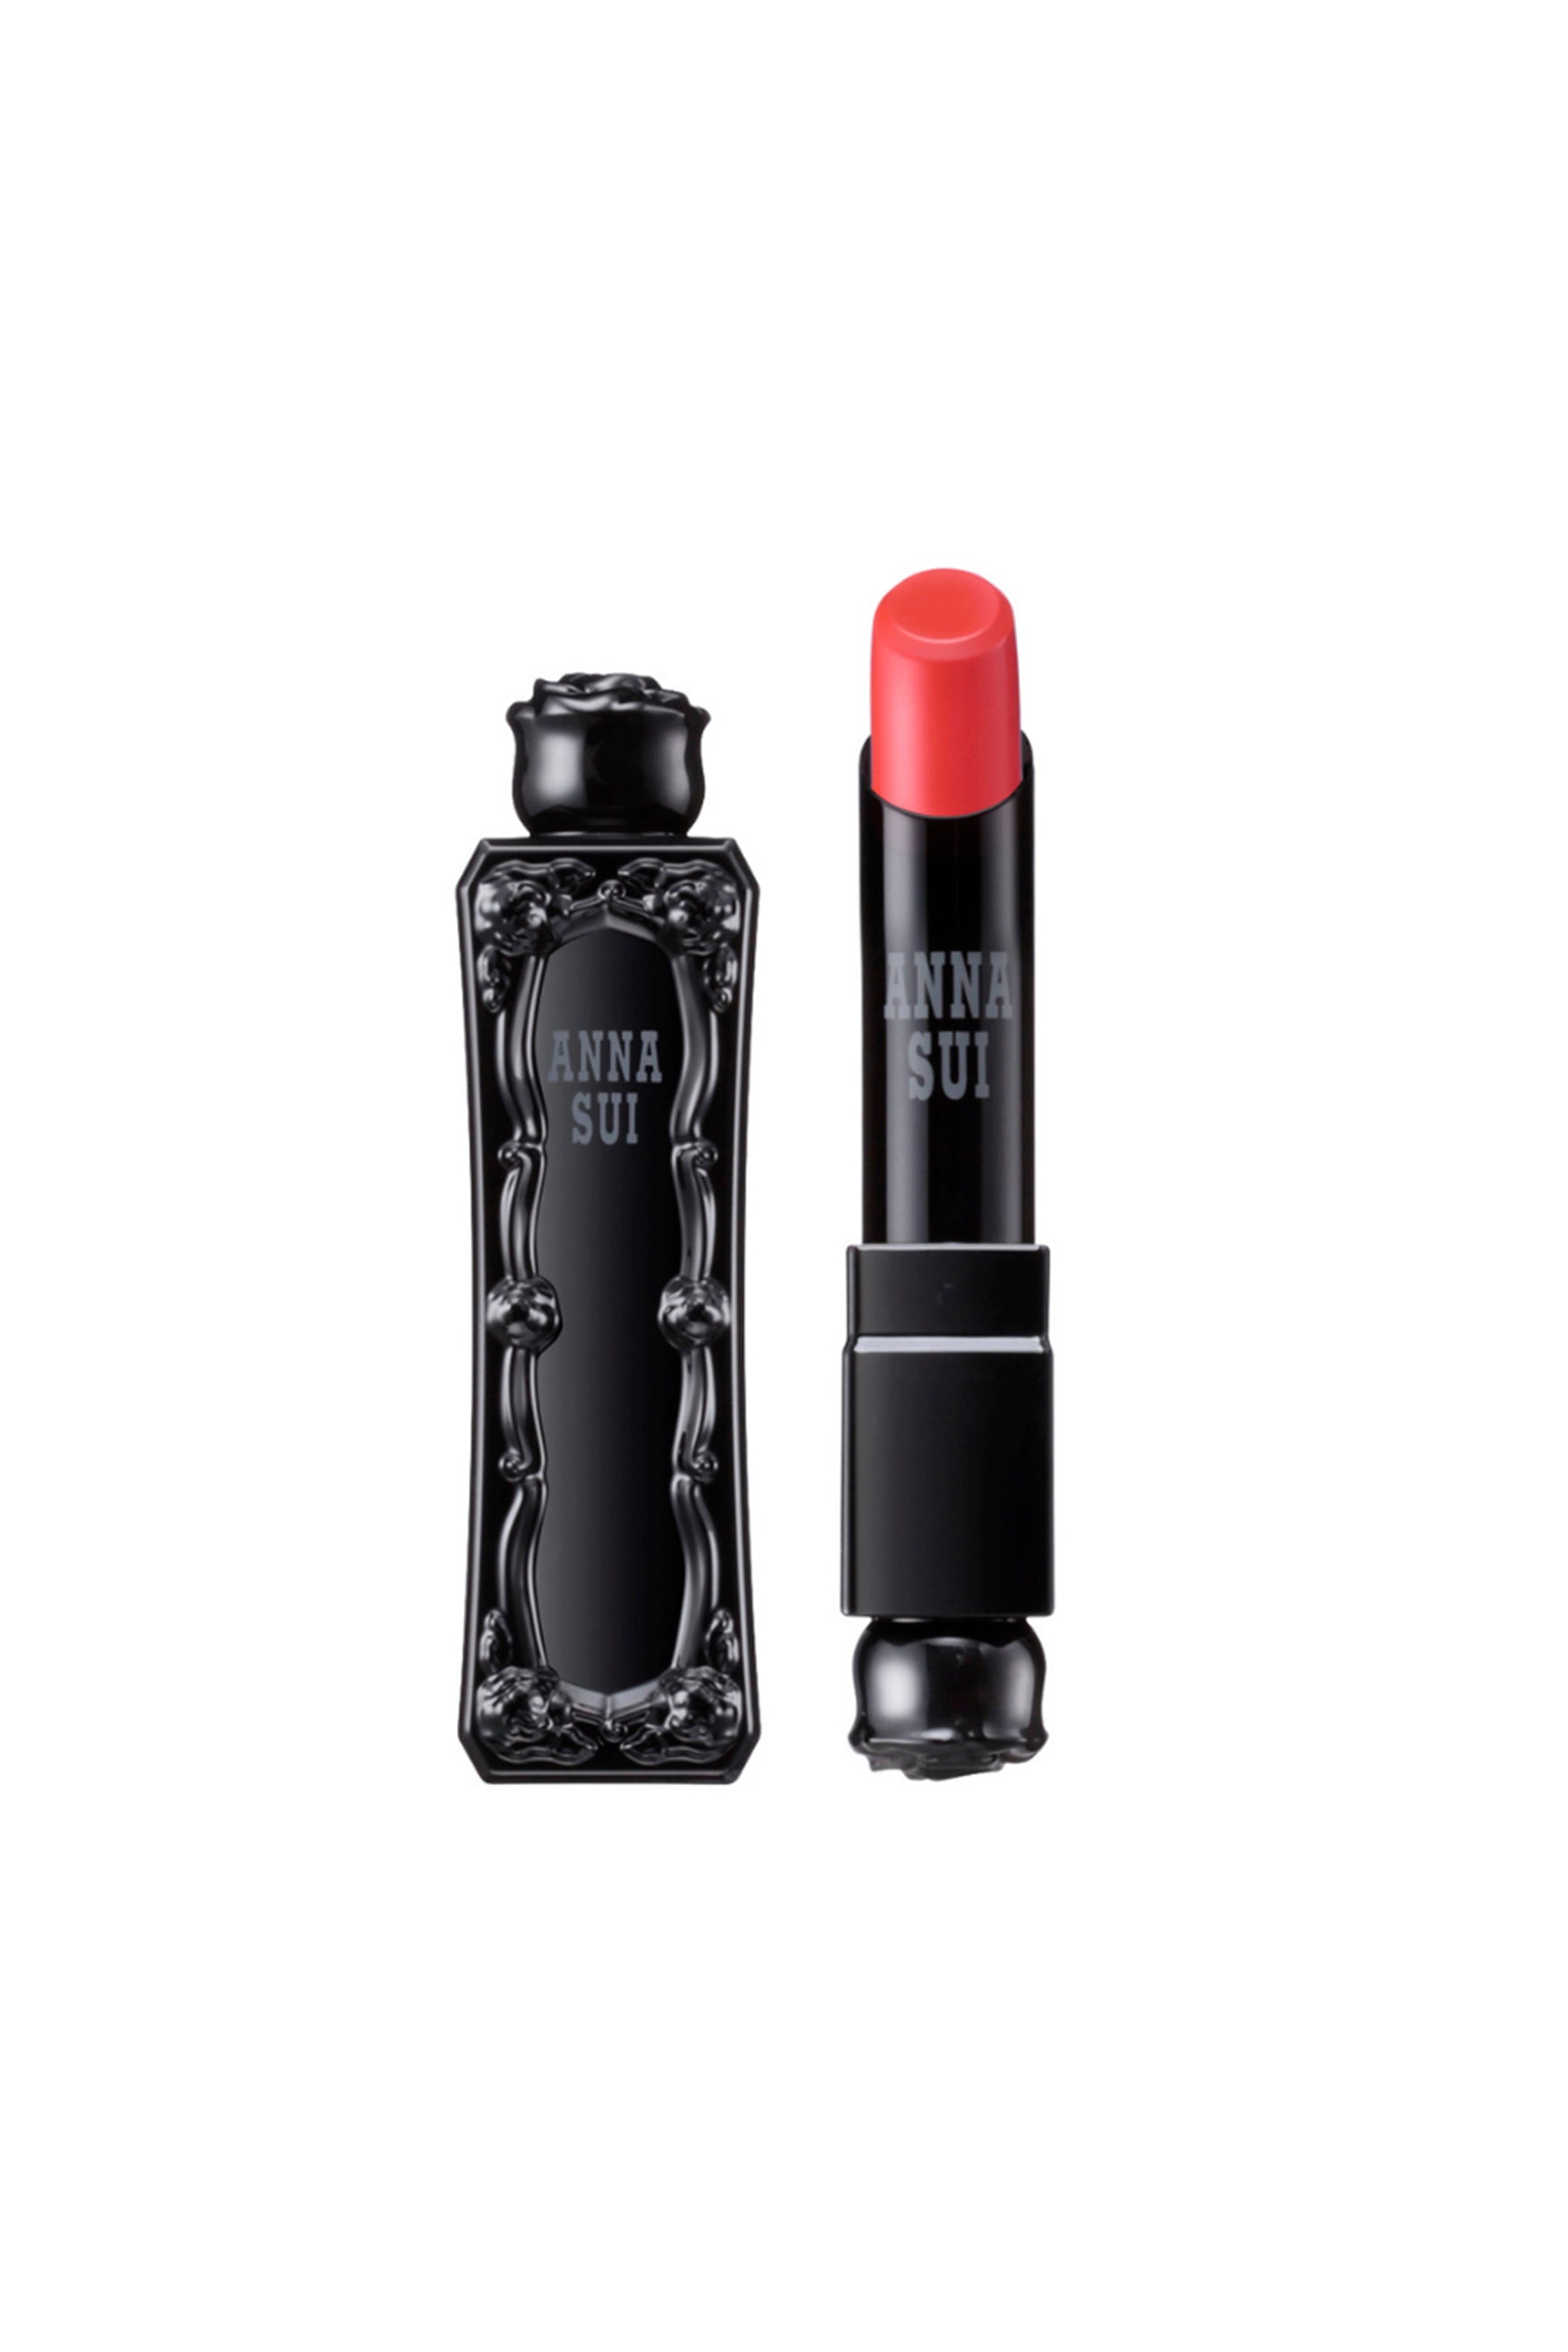 Passion Orange lipstick, in an Anna Sui, black container with raised rose pattern, rose on top 